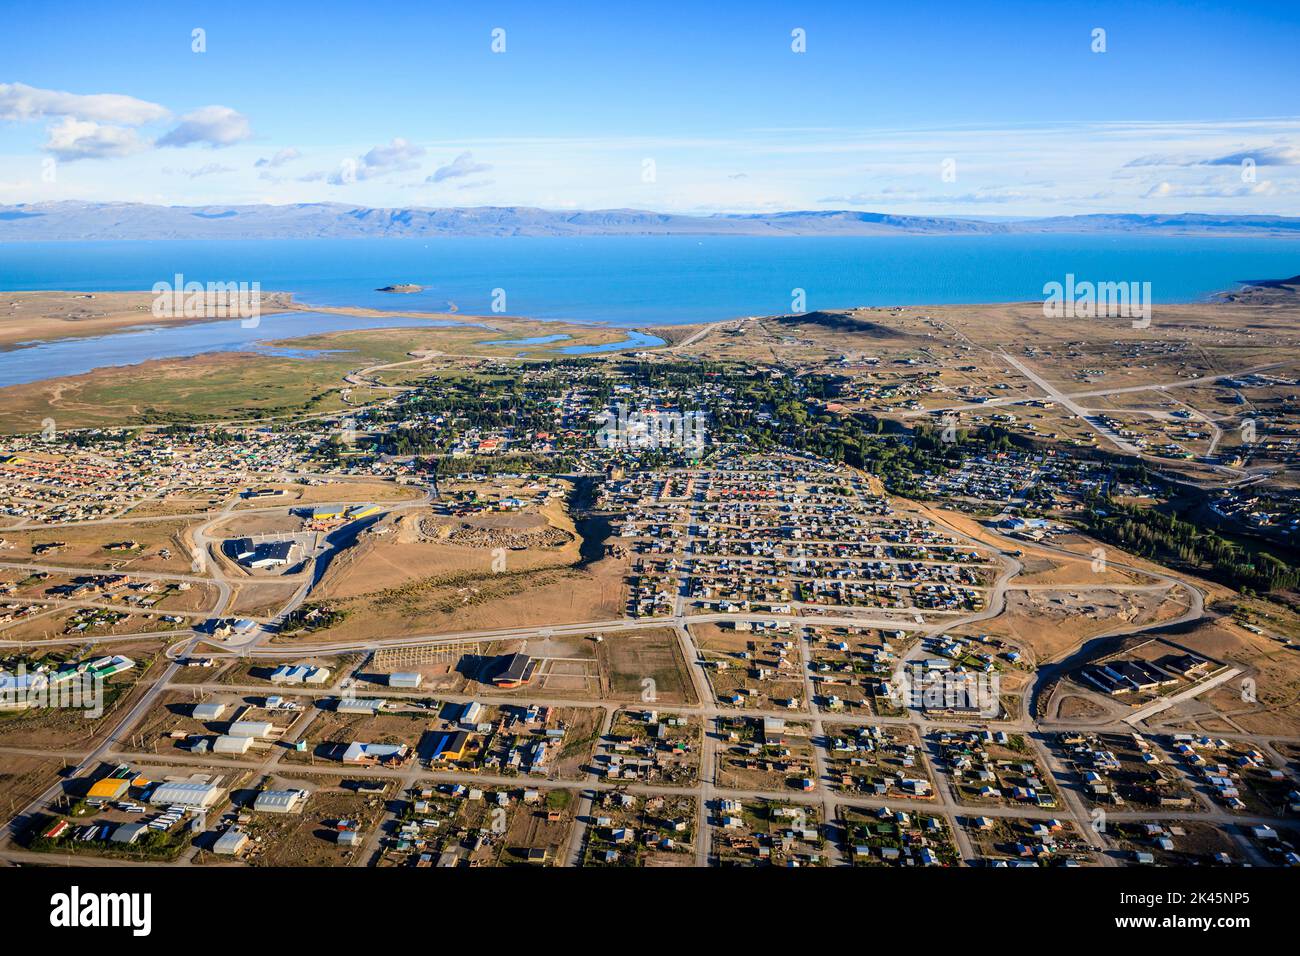 Aerial view of El Calafate, a sprawing town on the coast, a sea channel, on the edge of the Southern Patagonian Ice Field. Stock Photo